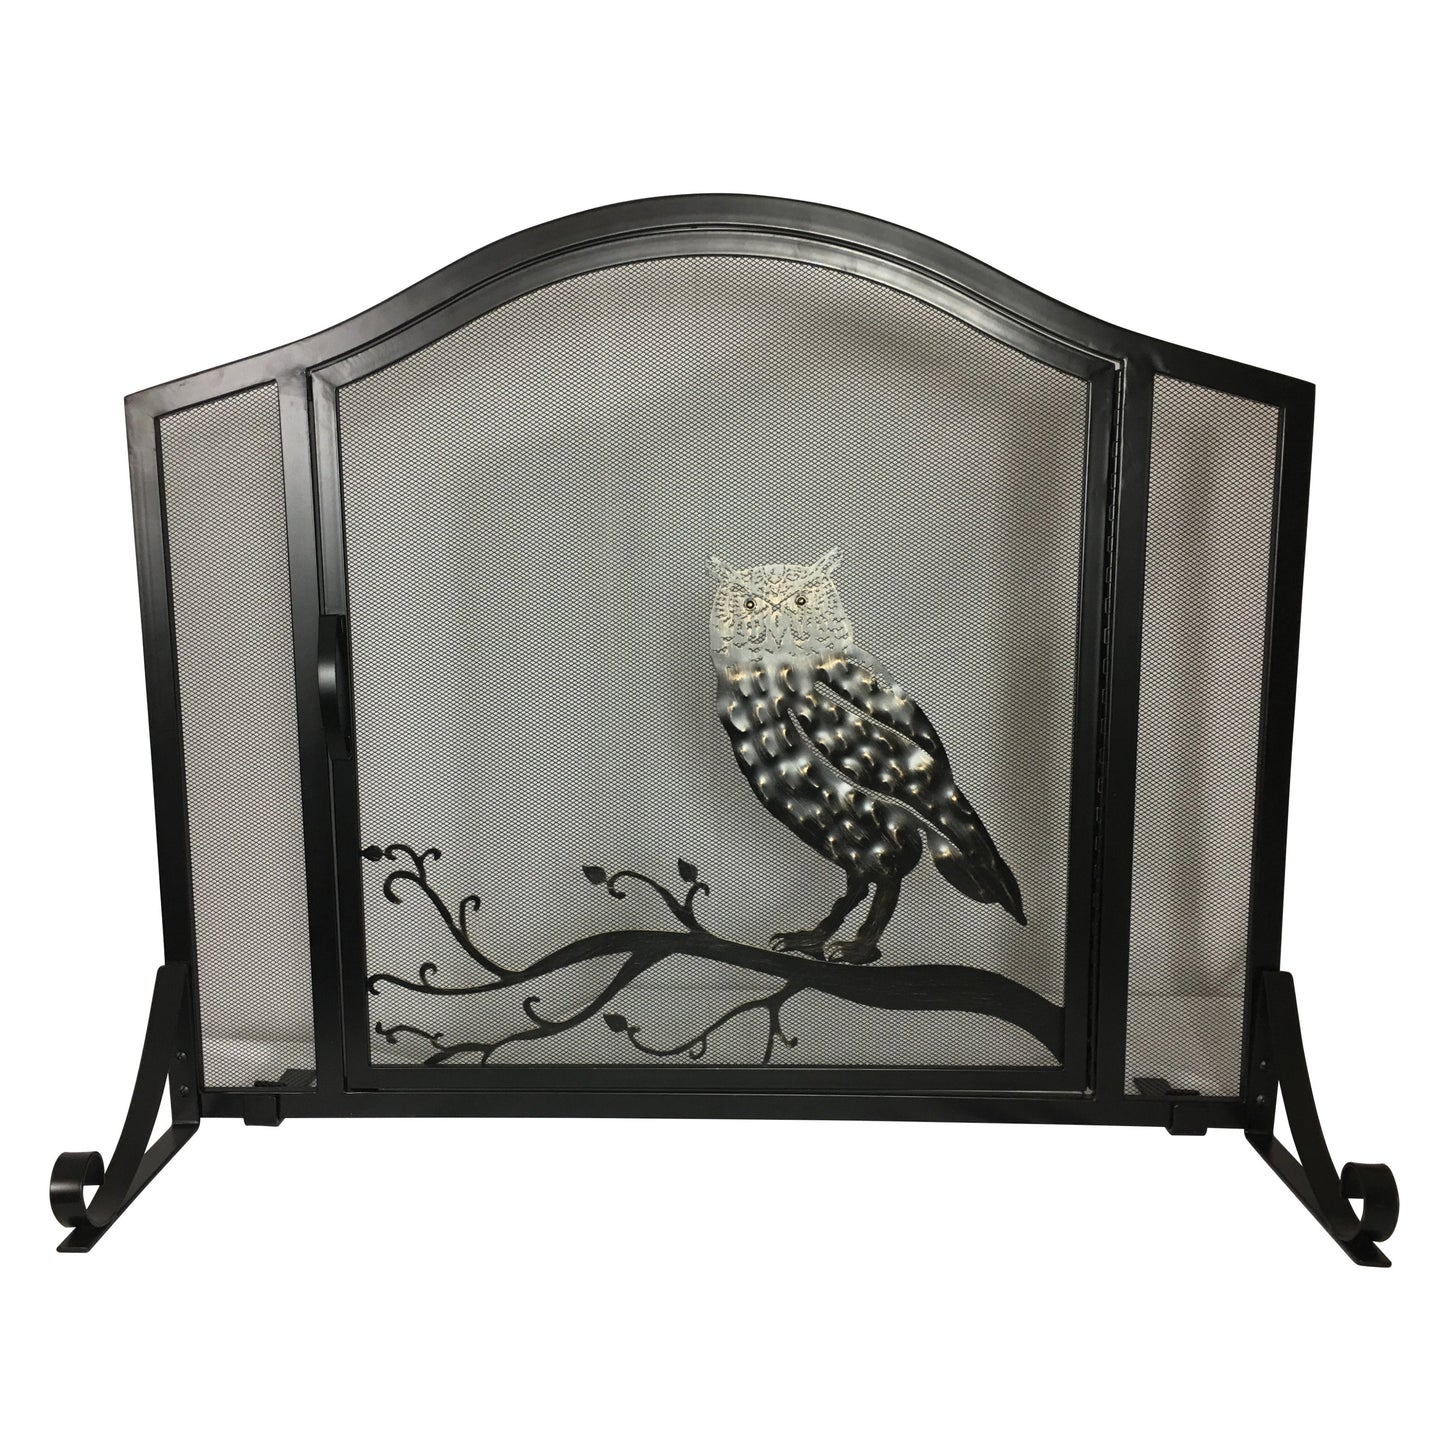 37" Steel Owl Design Wrought Iron Arched Panel Screen with Door